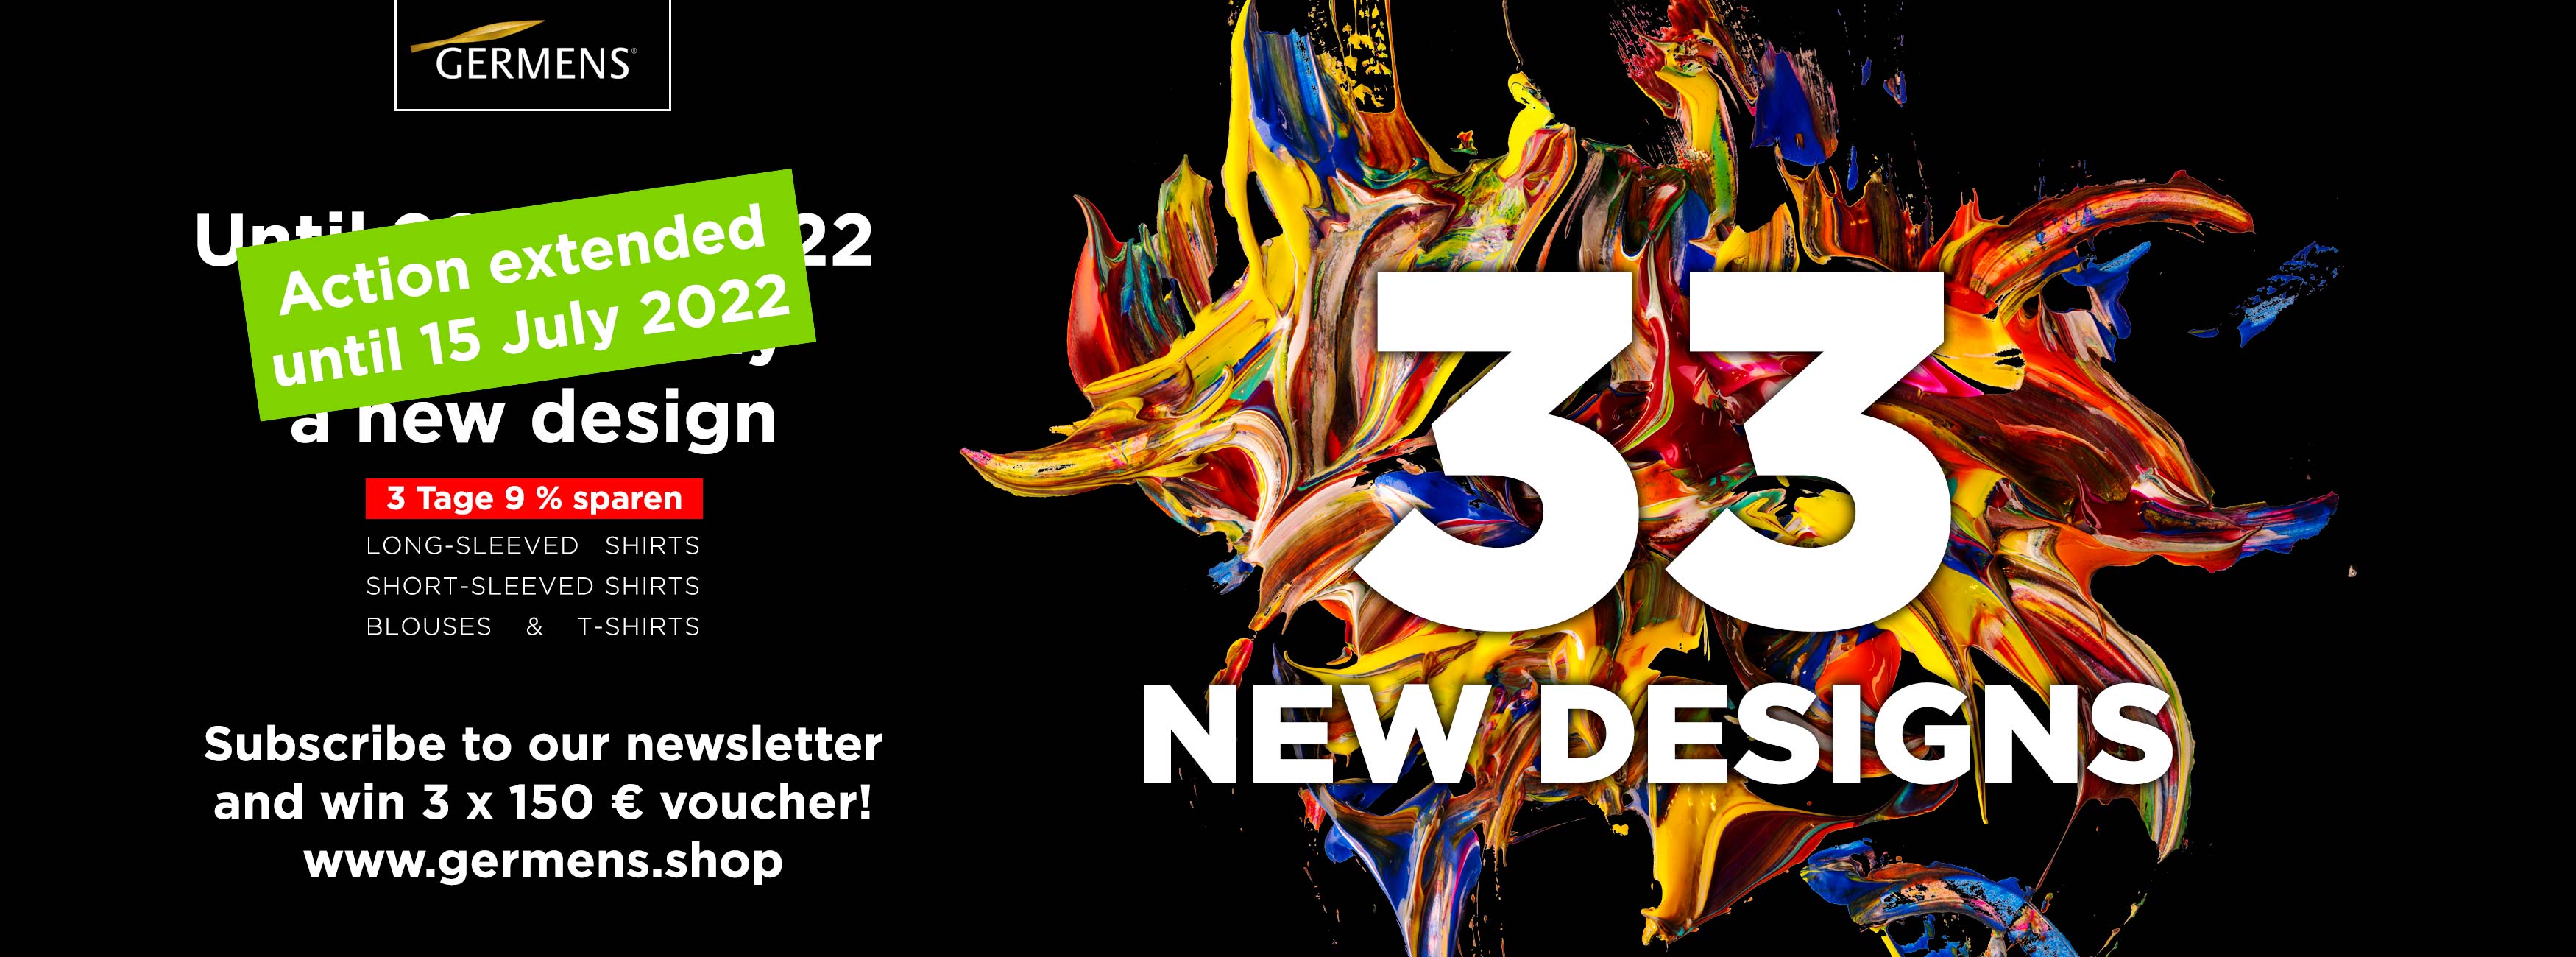 33 new GERMENS designs - 99 days - Save 9% for 3 days each - until 15 July 2022